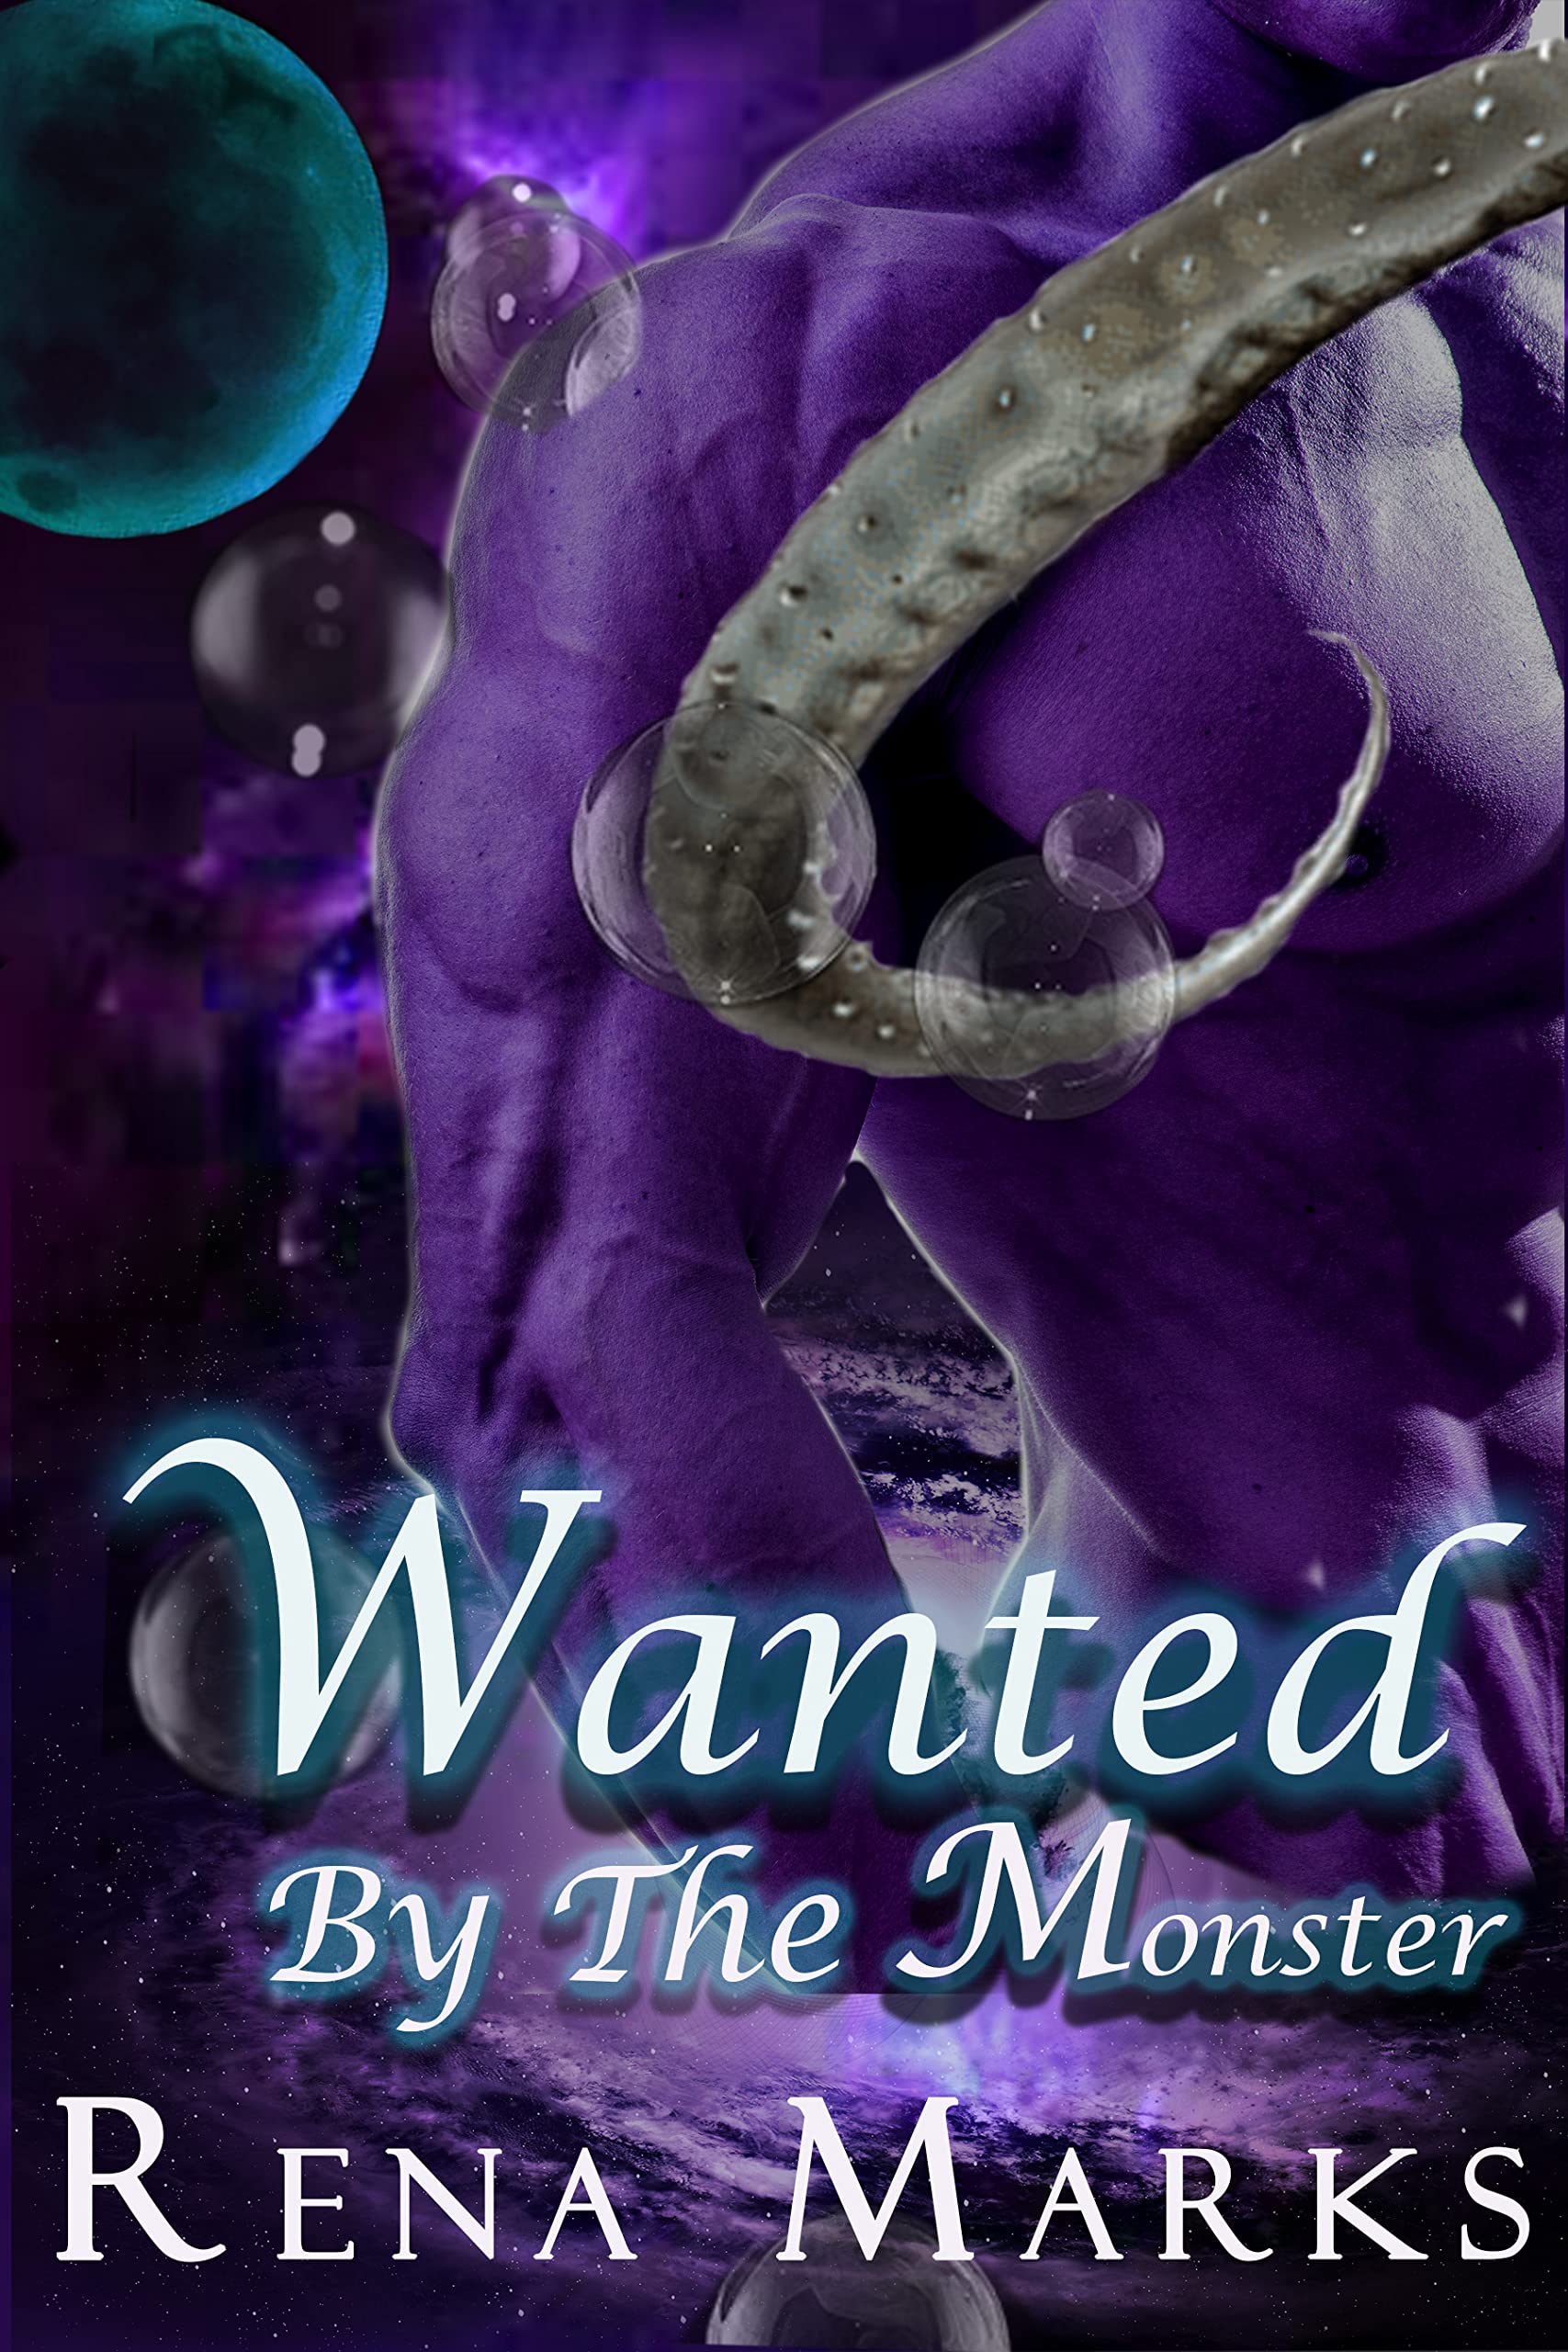 Wanted by the Monster by Rena Marks